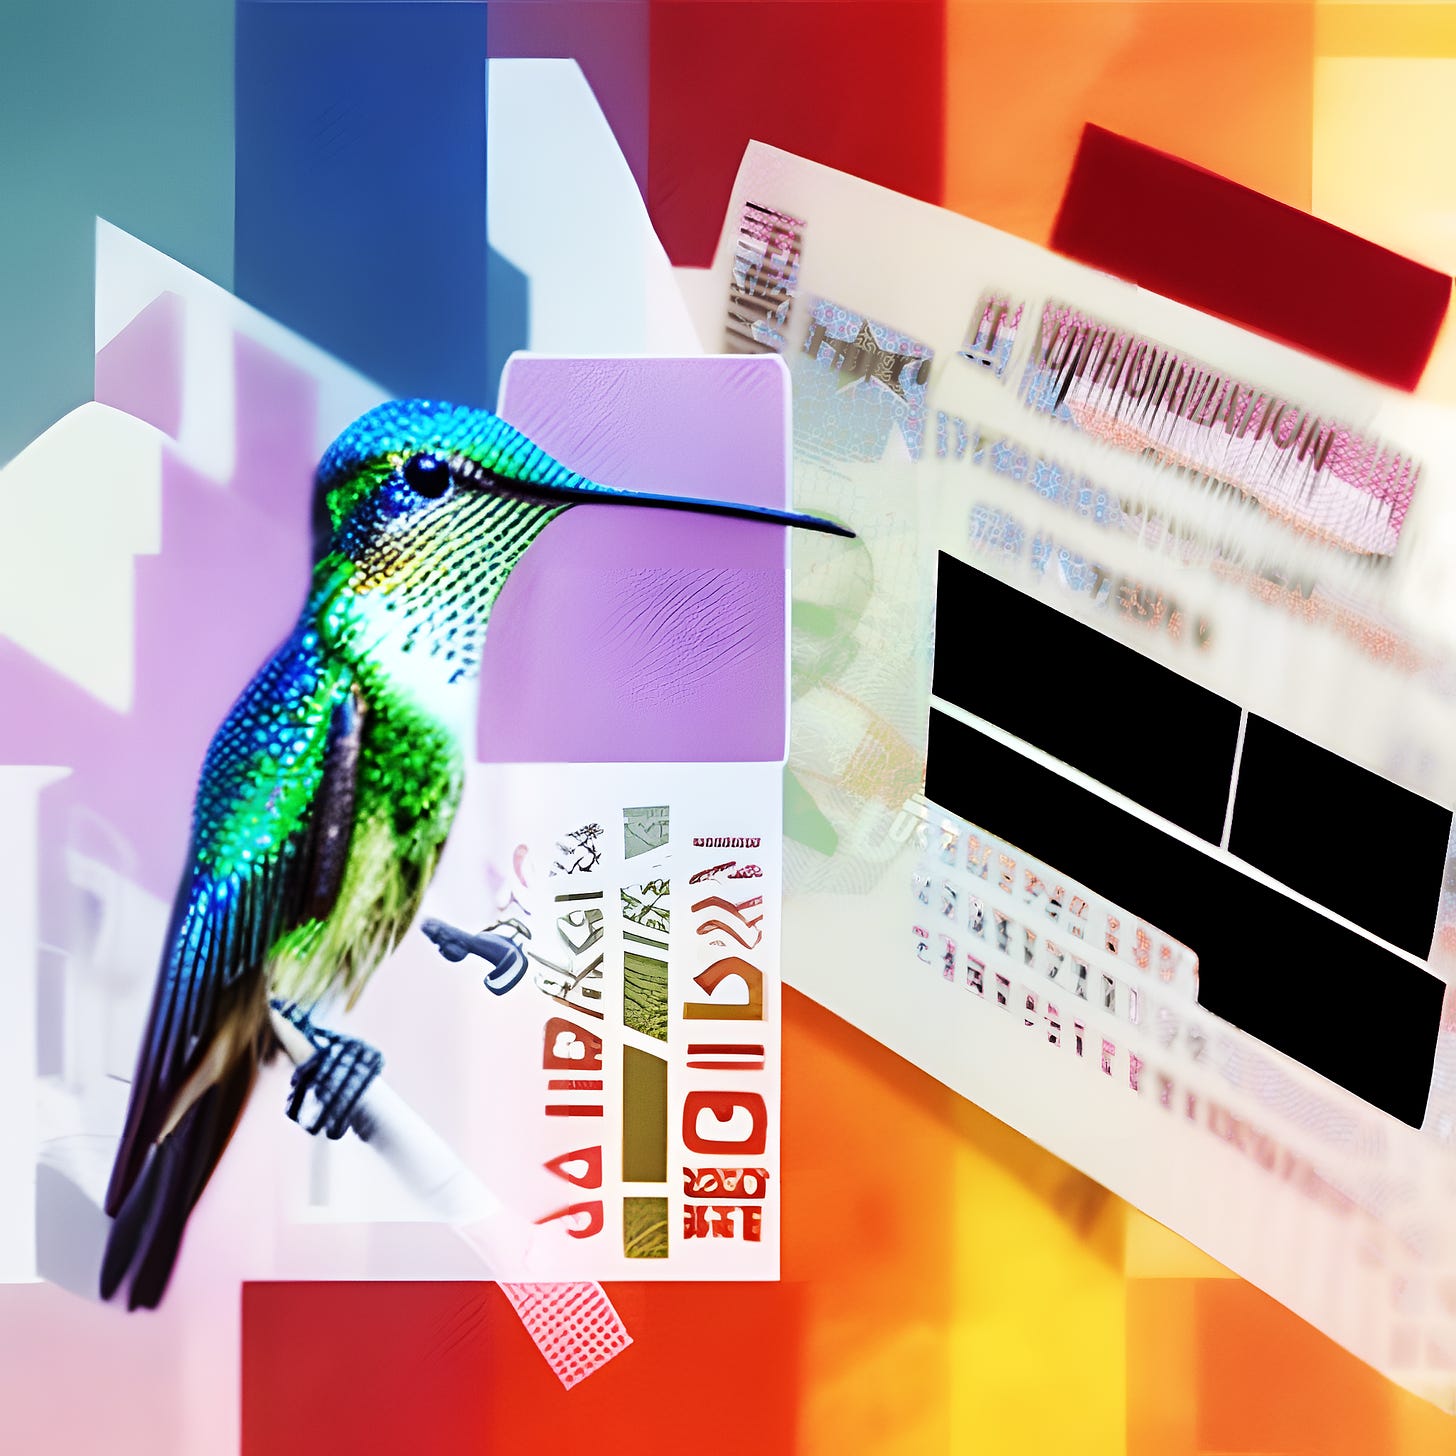 A holographic hummingbird on an abstract background